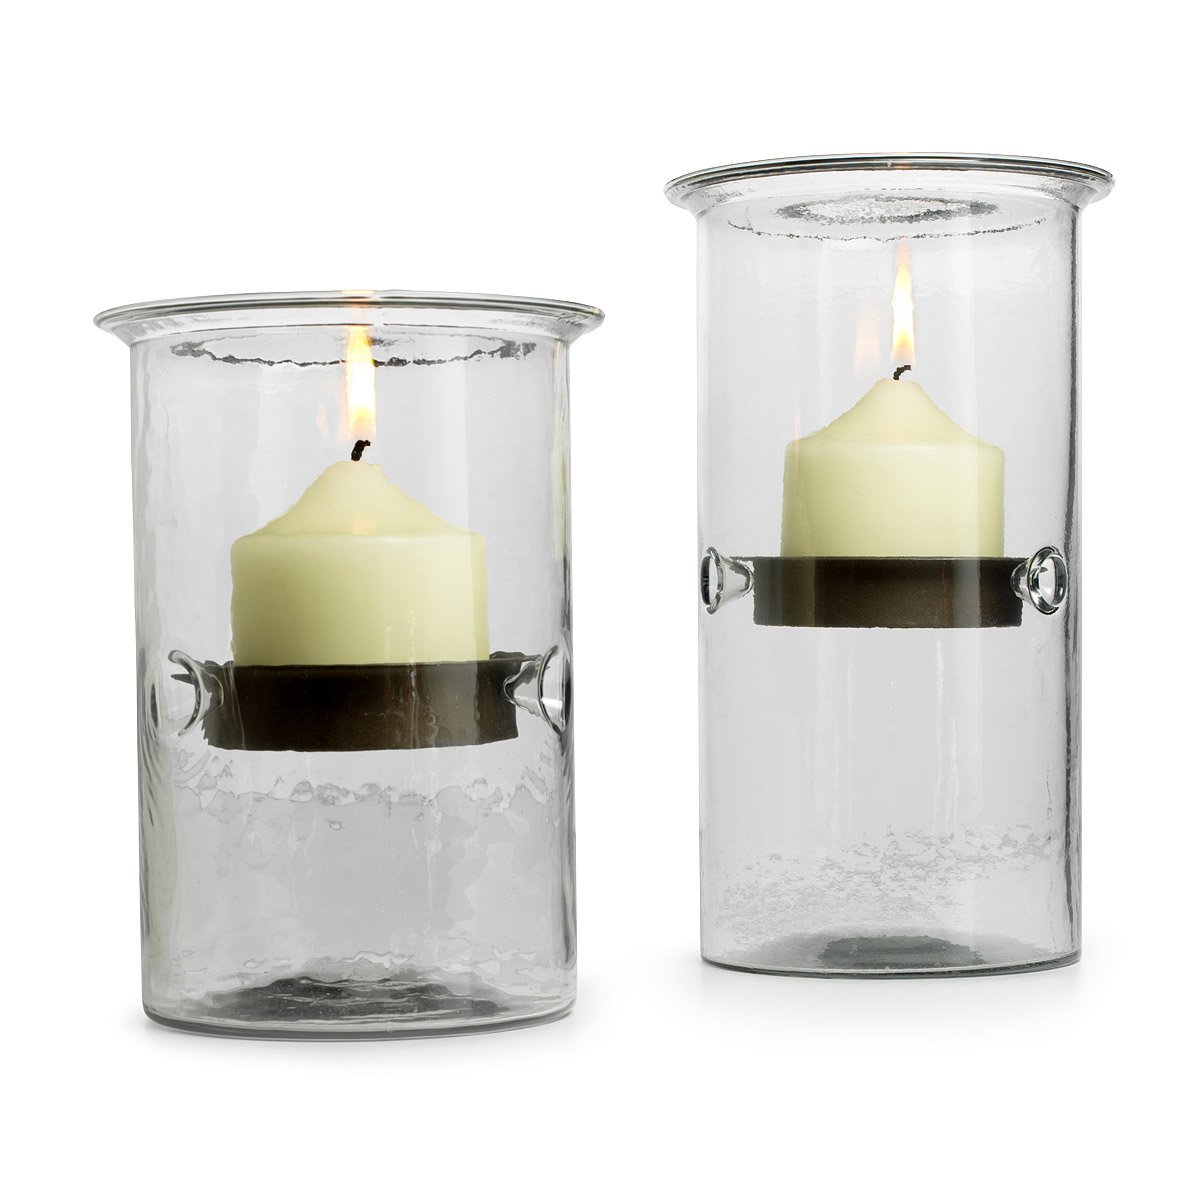 Hurricane Candle Holders  Sleek and Functional Glass and Metal  interior decor images, interior design ideas for home, interior design layout, and interior decor ideas Large Hurricane Candle Holders 1200 x 1200